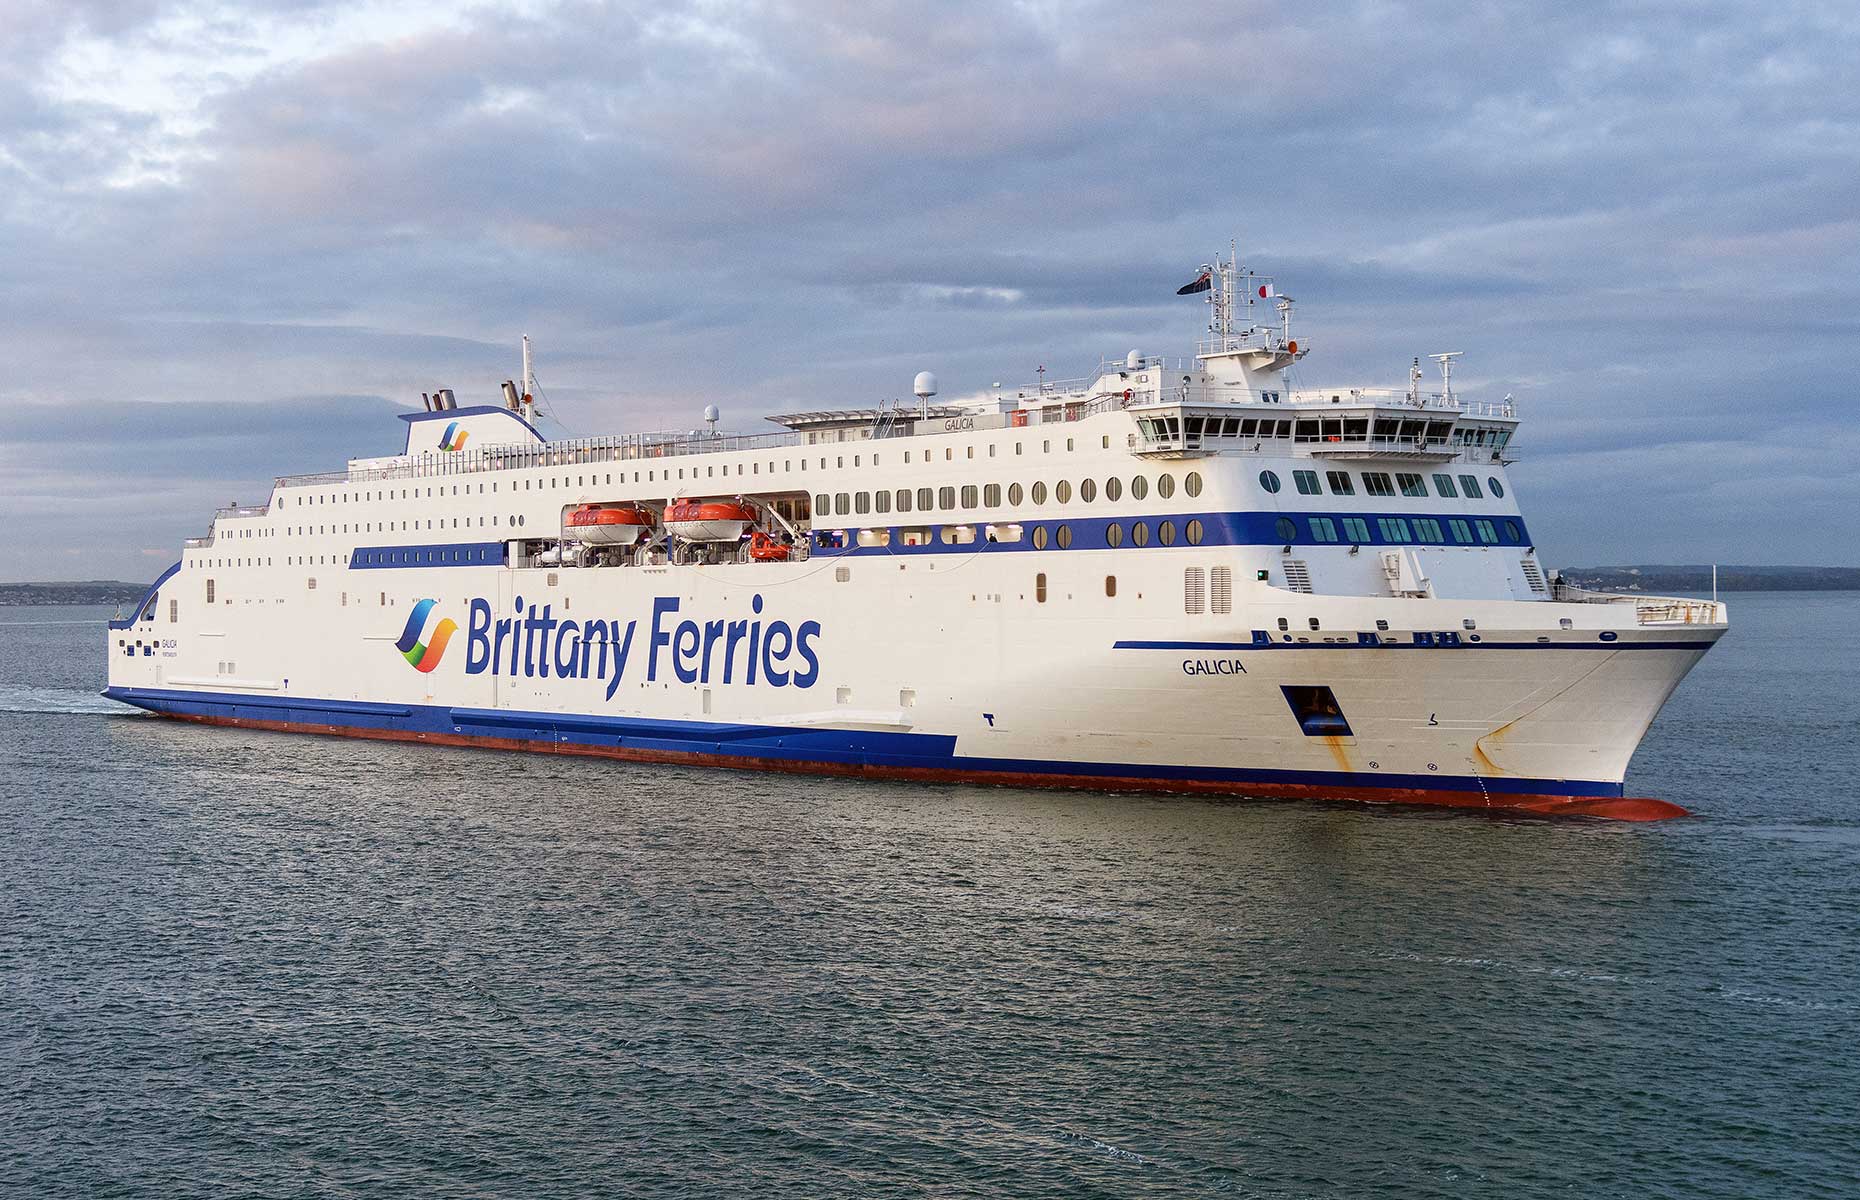 Brittany Ferries' Galicia (Image: Maritime Photographic)